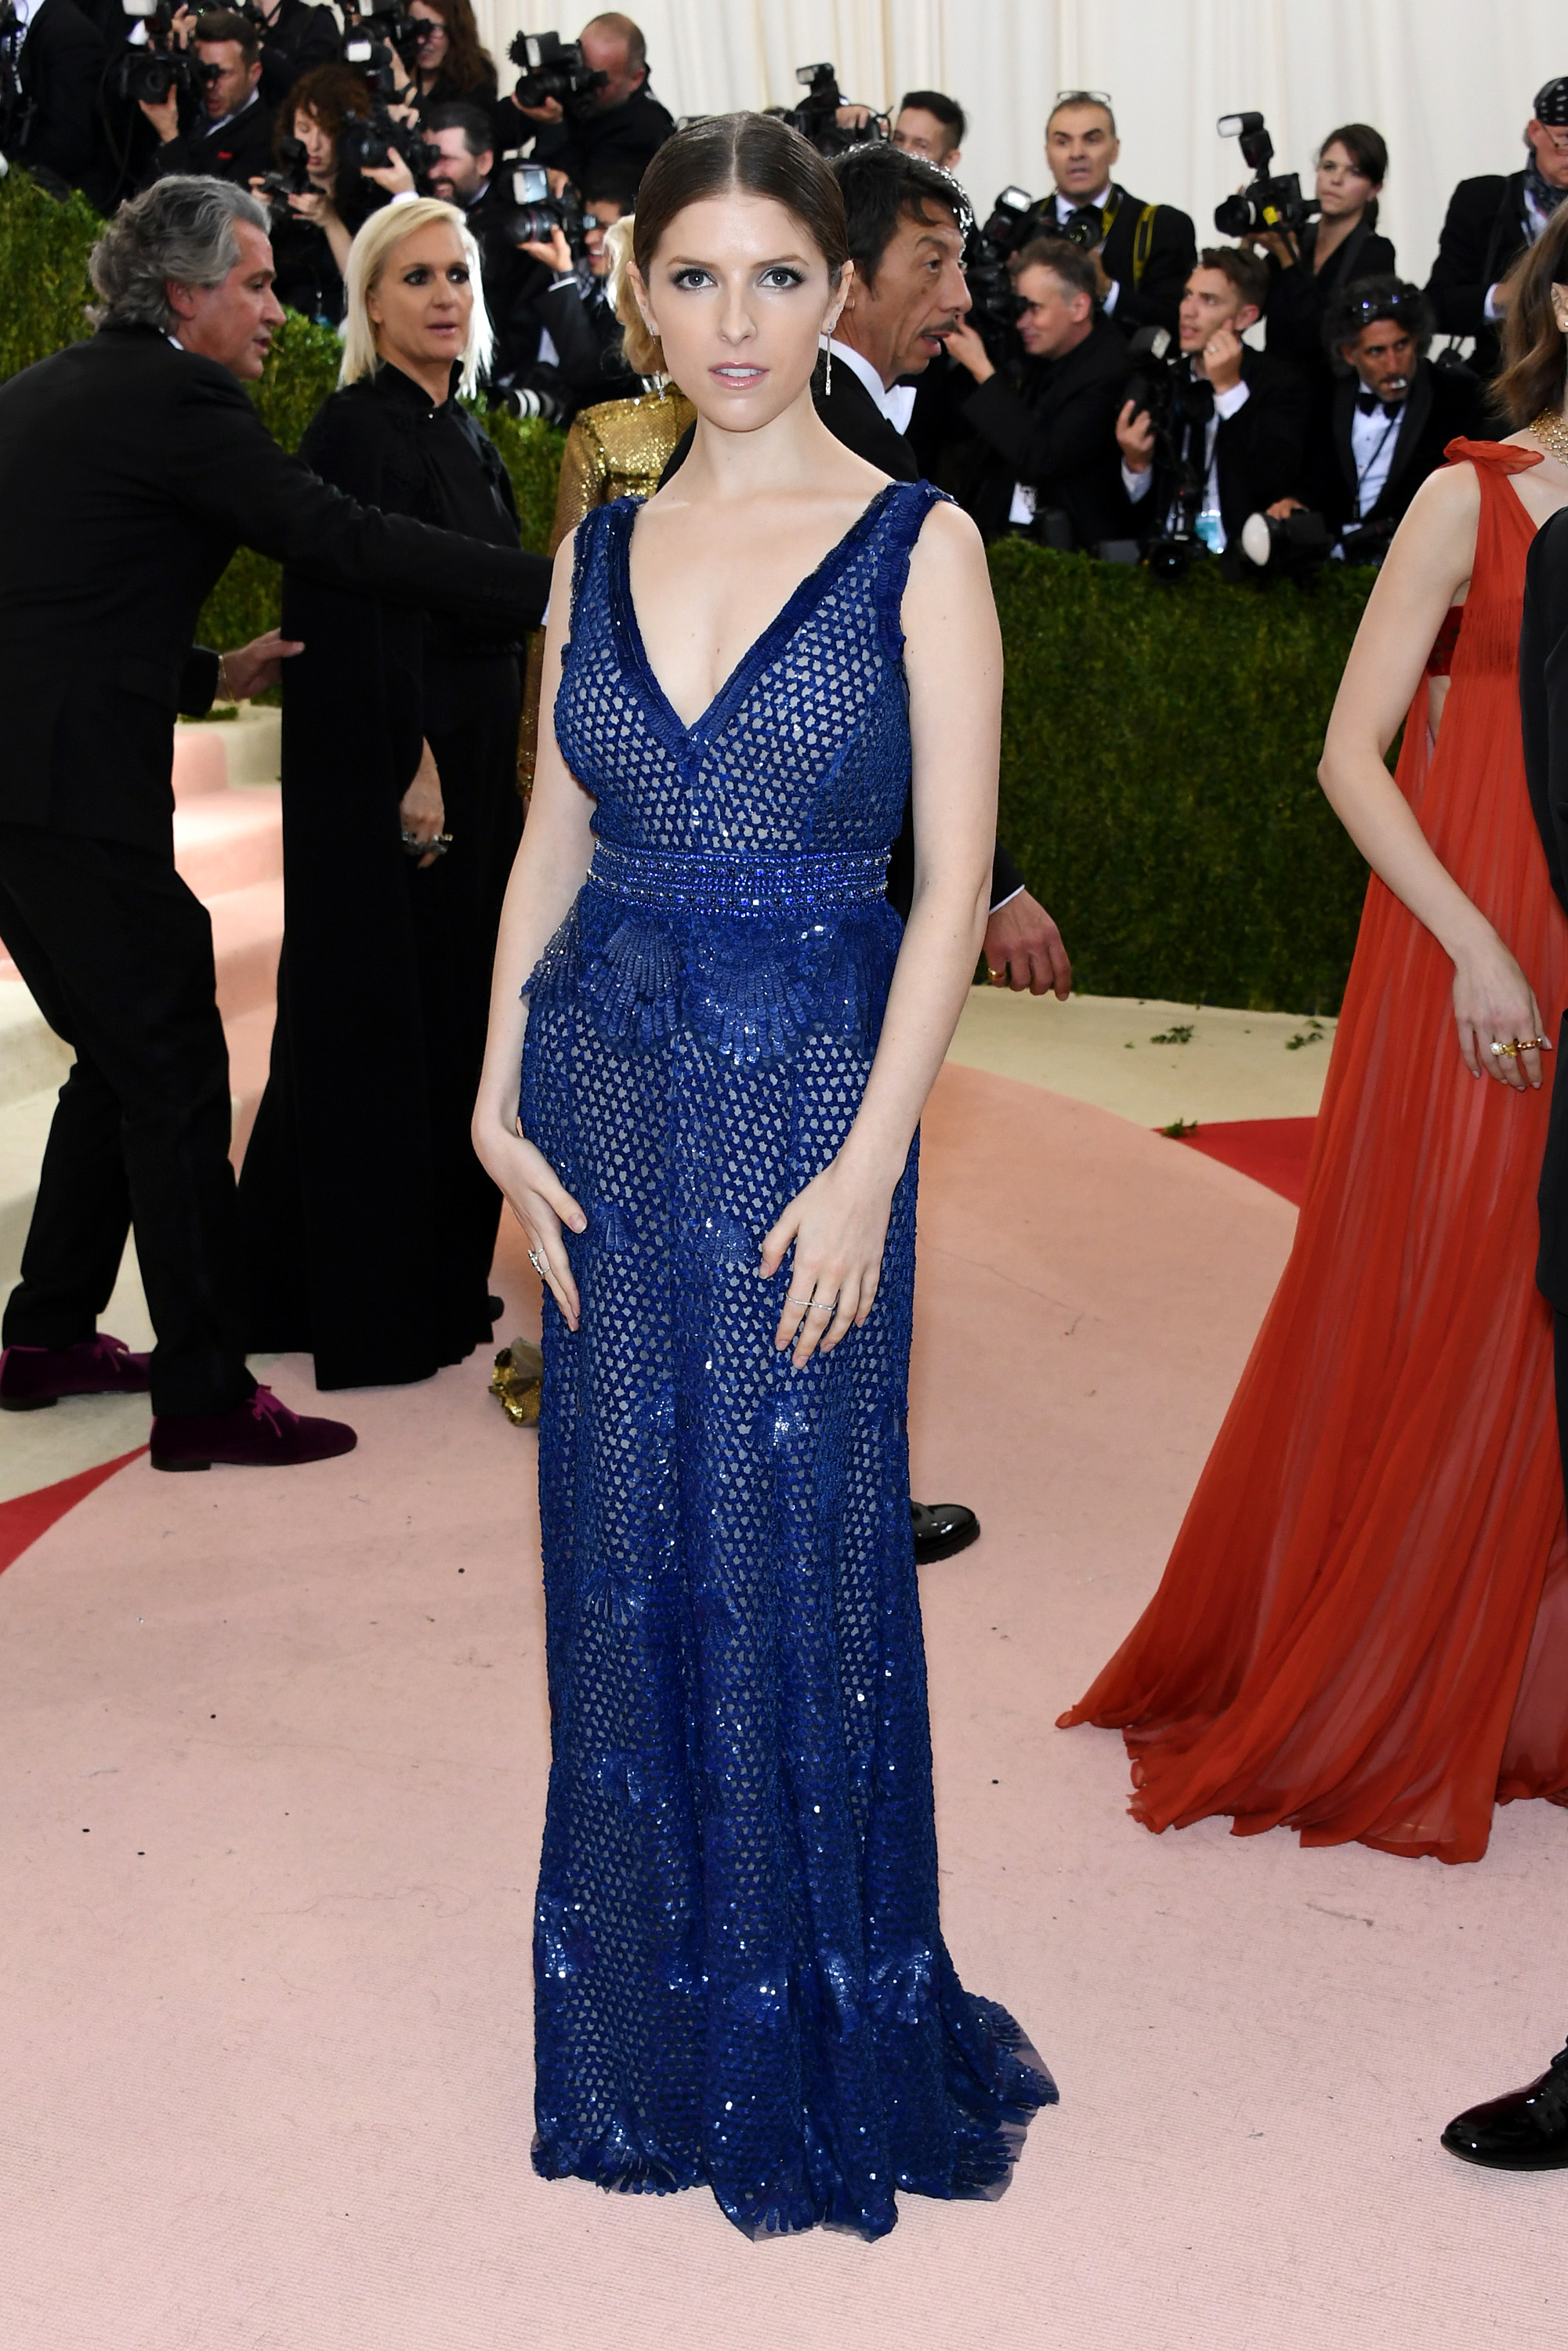 Anna Kendrick attends "Manus x Machina: Fashion In An Age Of Technology" Costume Institute Gala at Metropolitan Museum of Art on May 2, 2016 in New York City.